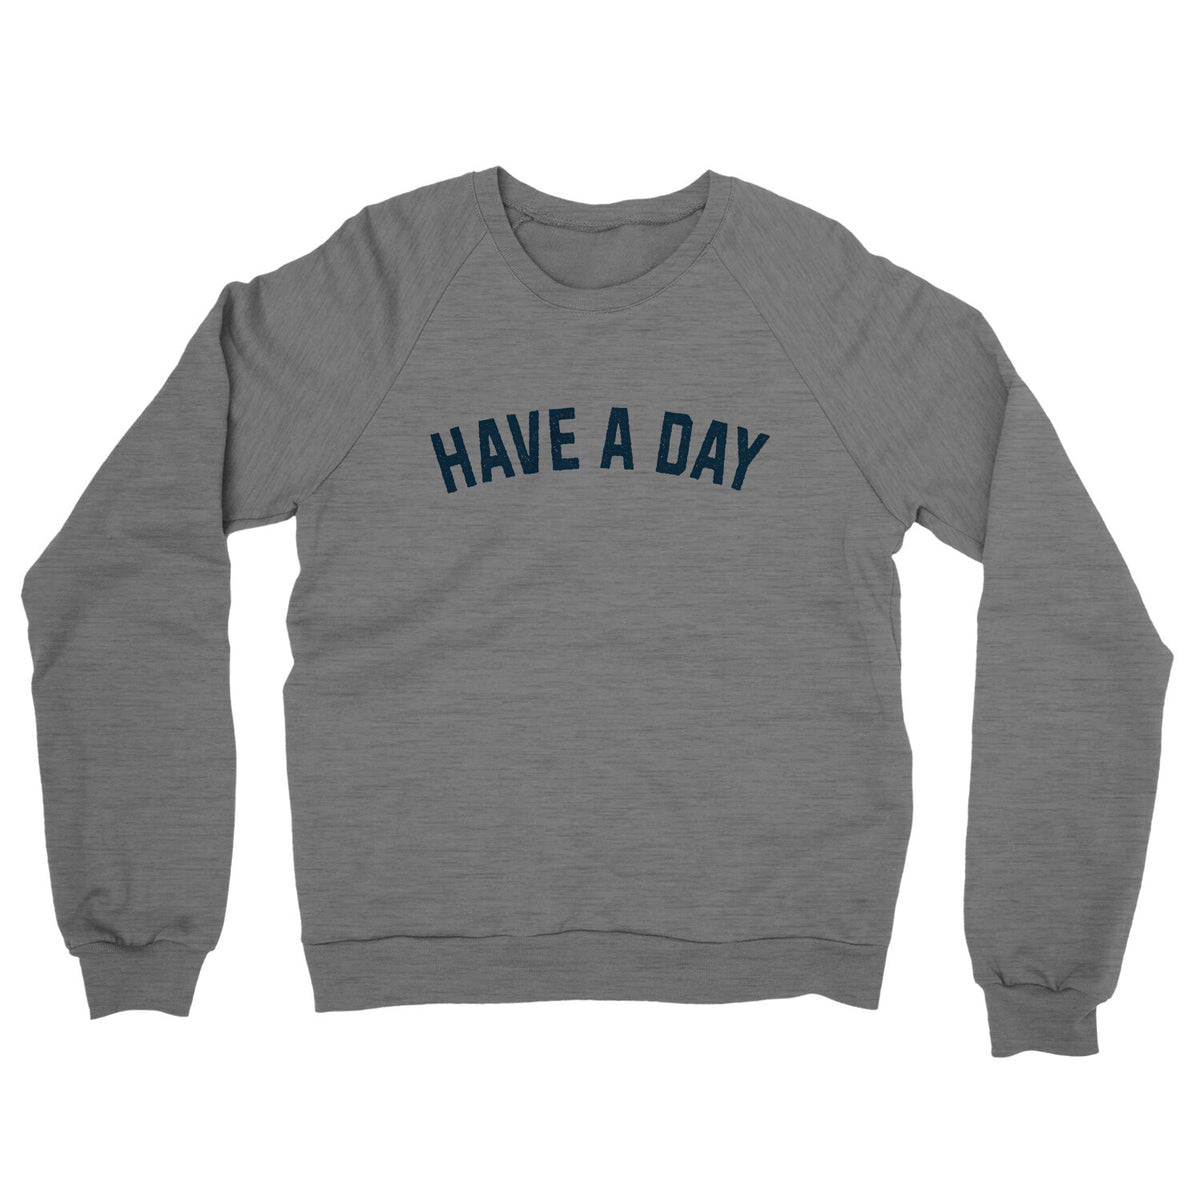 Have a Day in Graphite Heather Color